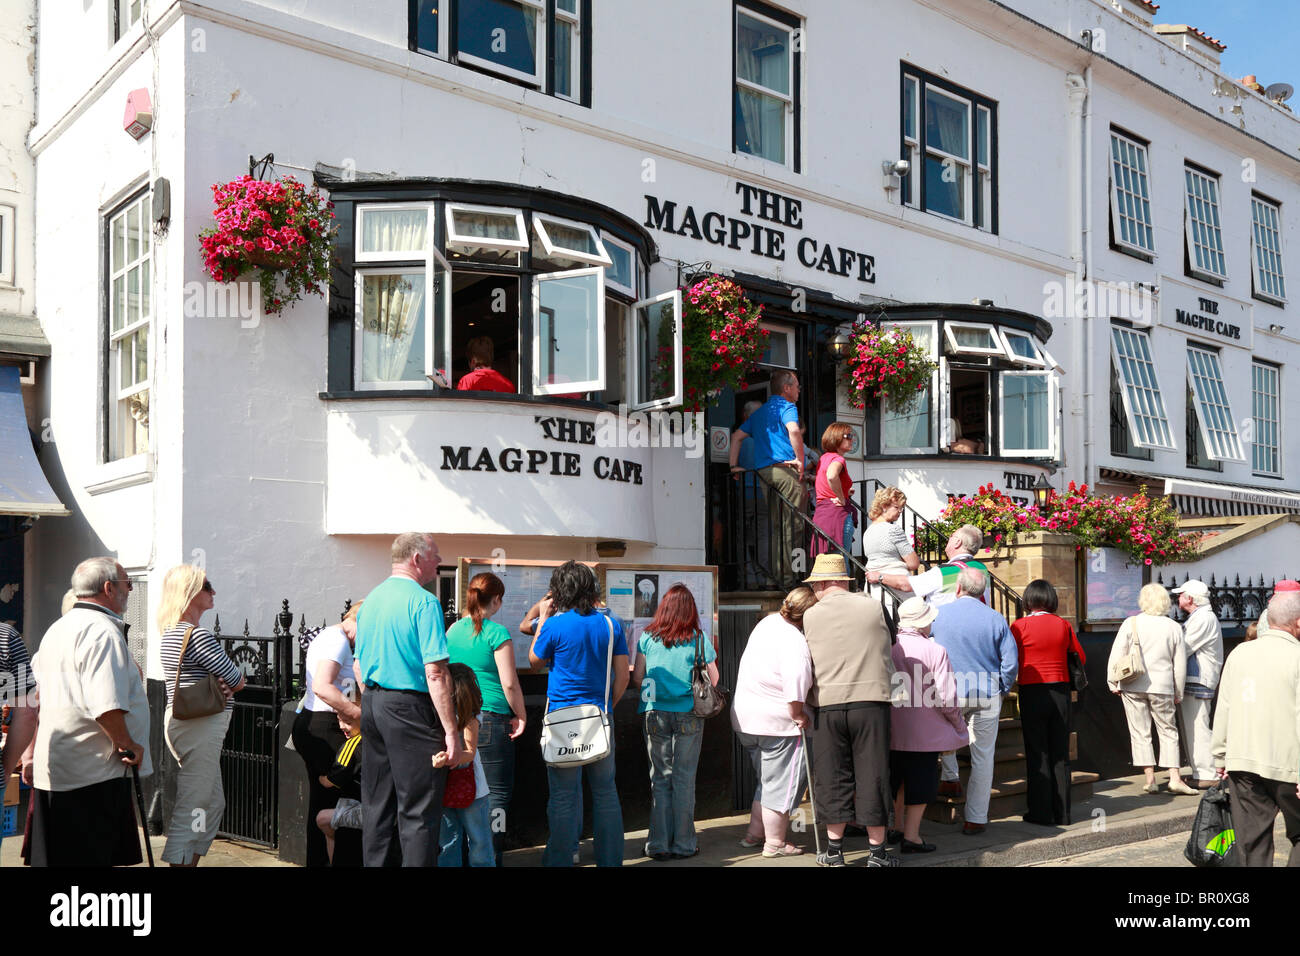 Diners queuing outside The Magpie Cafe restaurant, Whitby, North